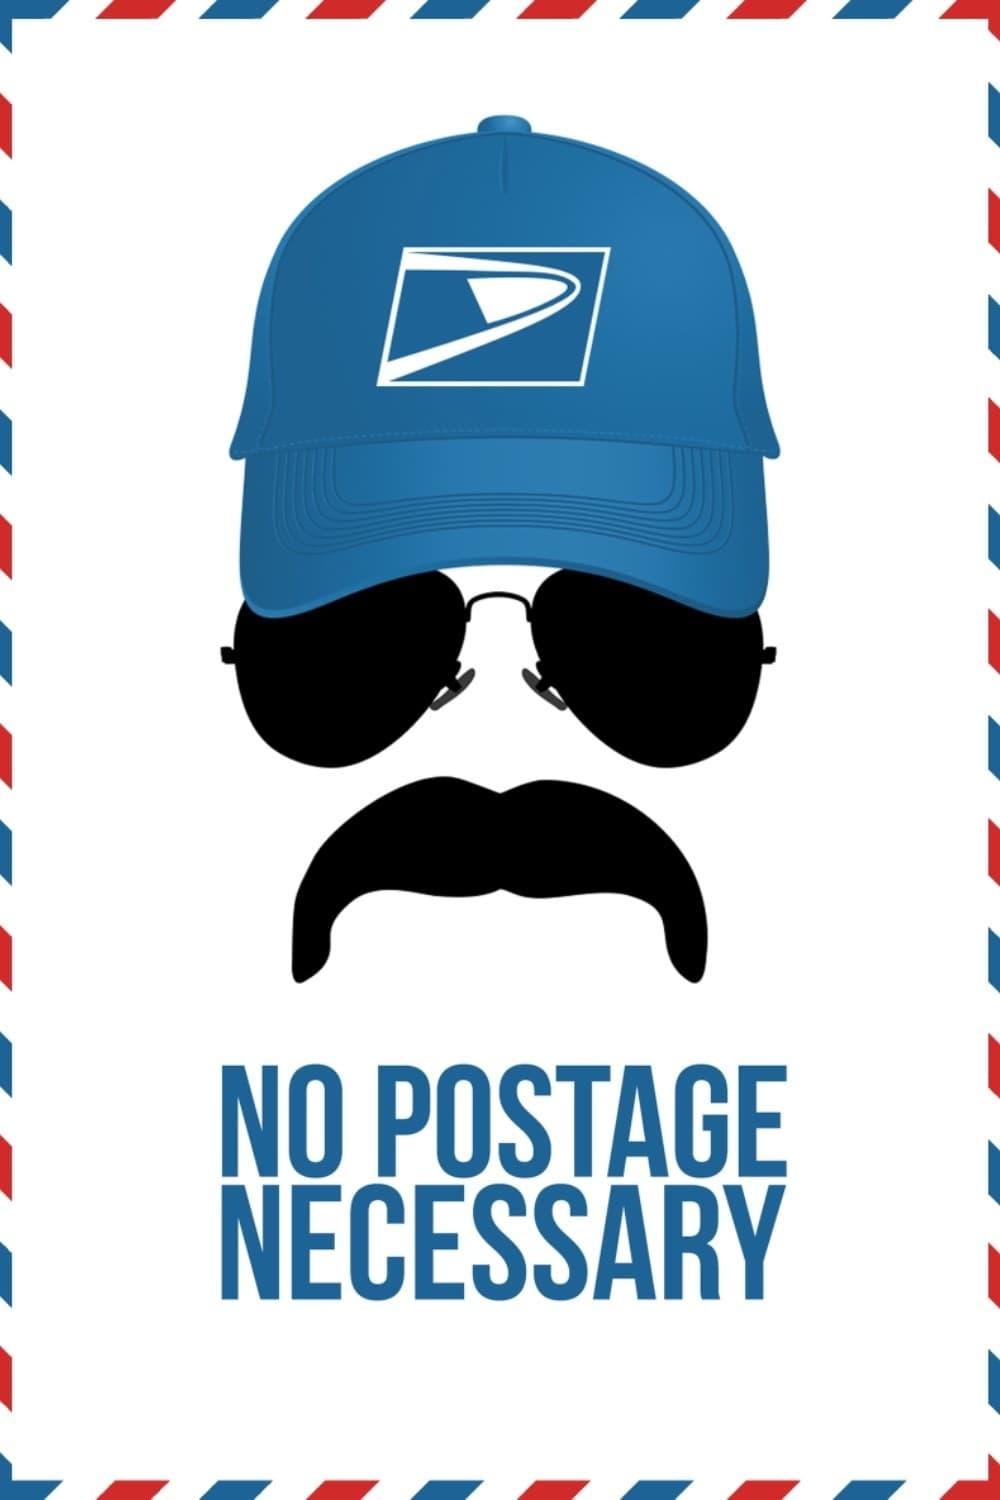 No Postage Necessary poster